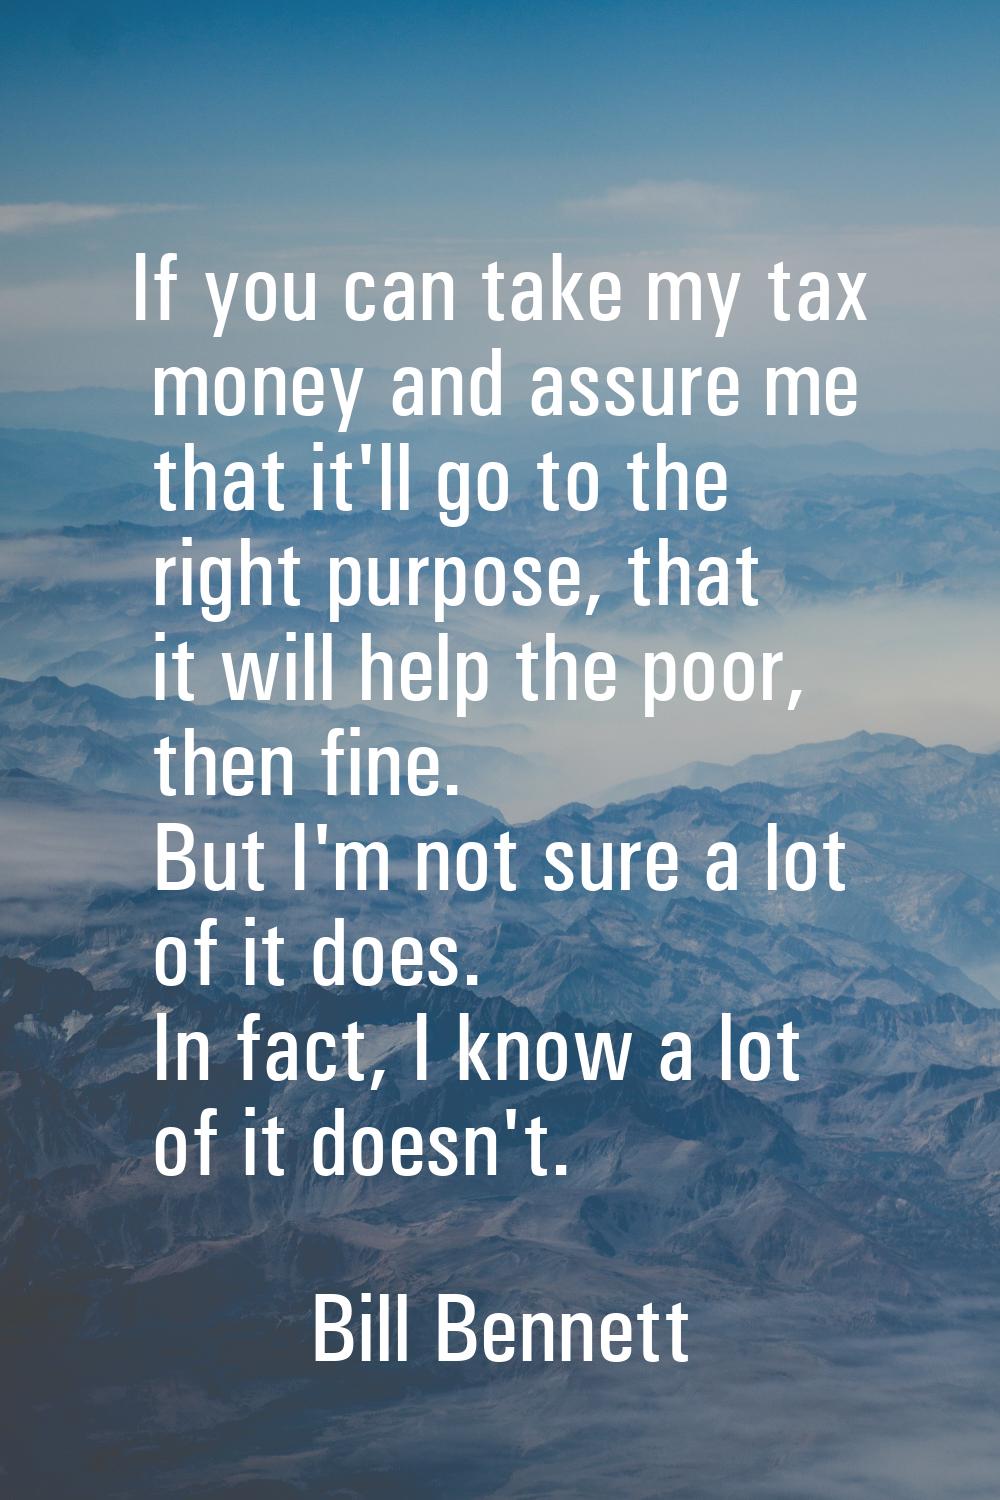 If you can take my tax money and assure me that it'll go to the right purpose, that it will help th